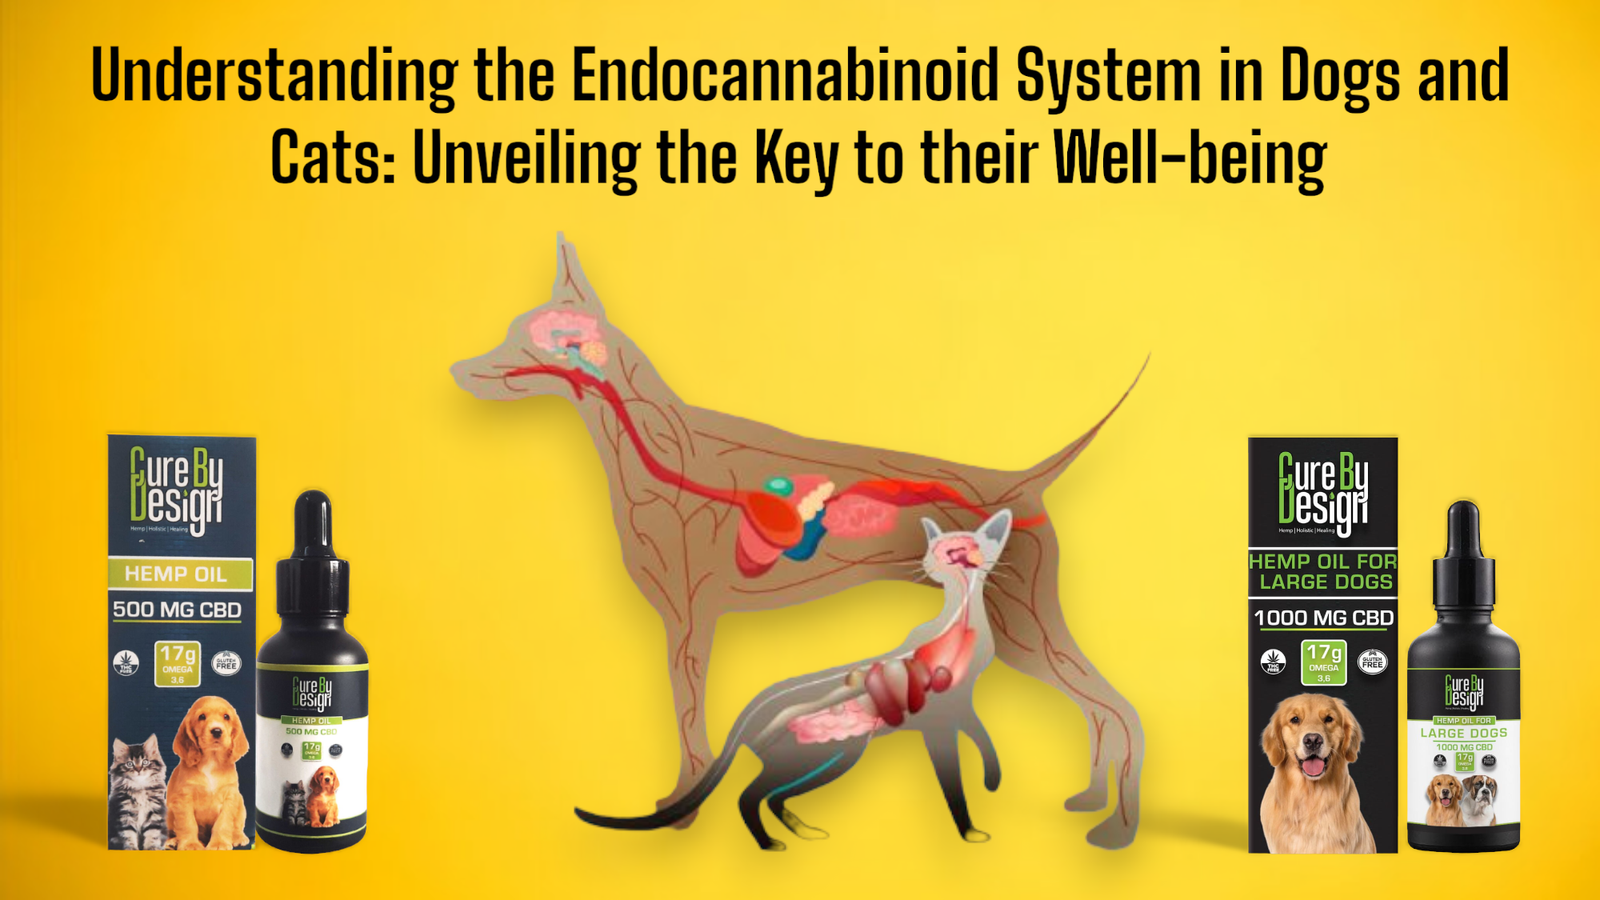 Understanding the Endocannabinoid System in Dogs and Cats: Unveiling the Key to their Well-Being